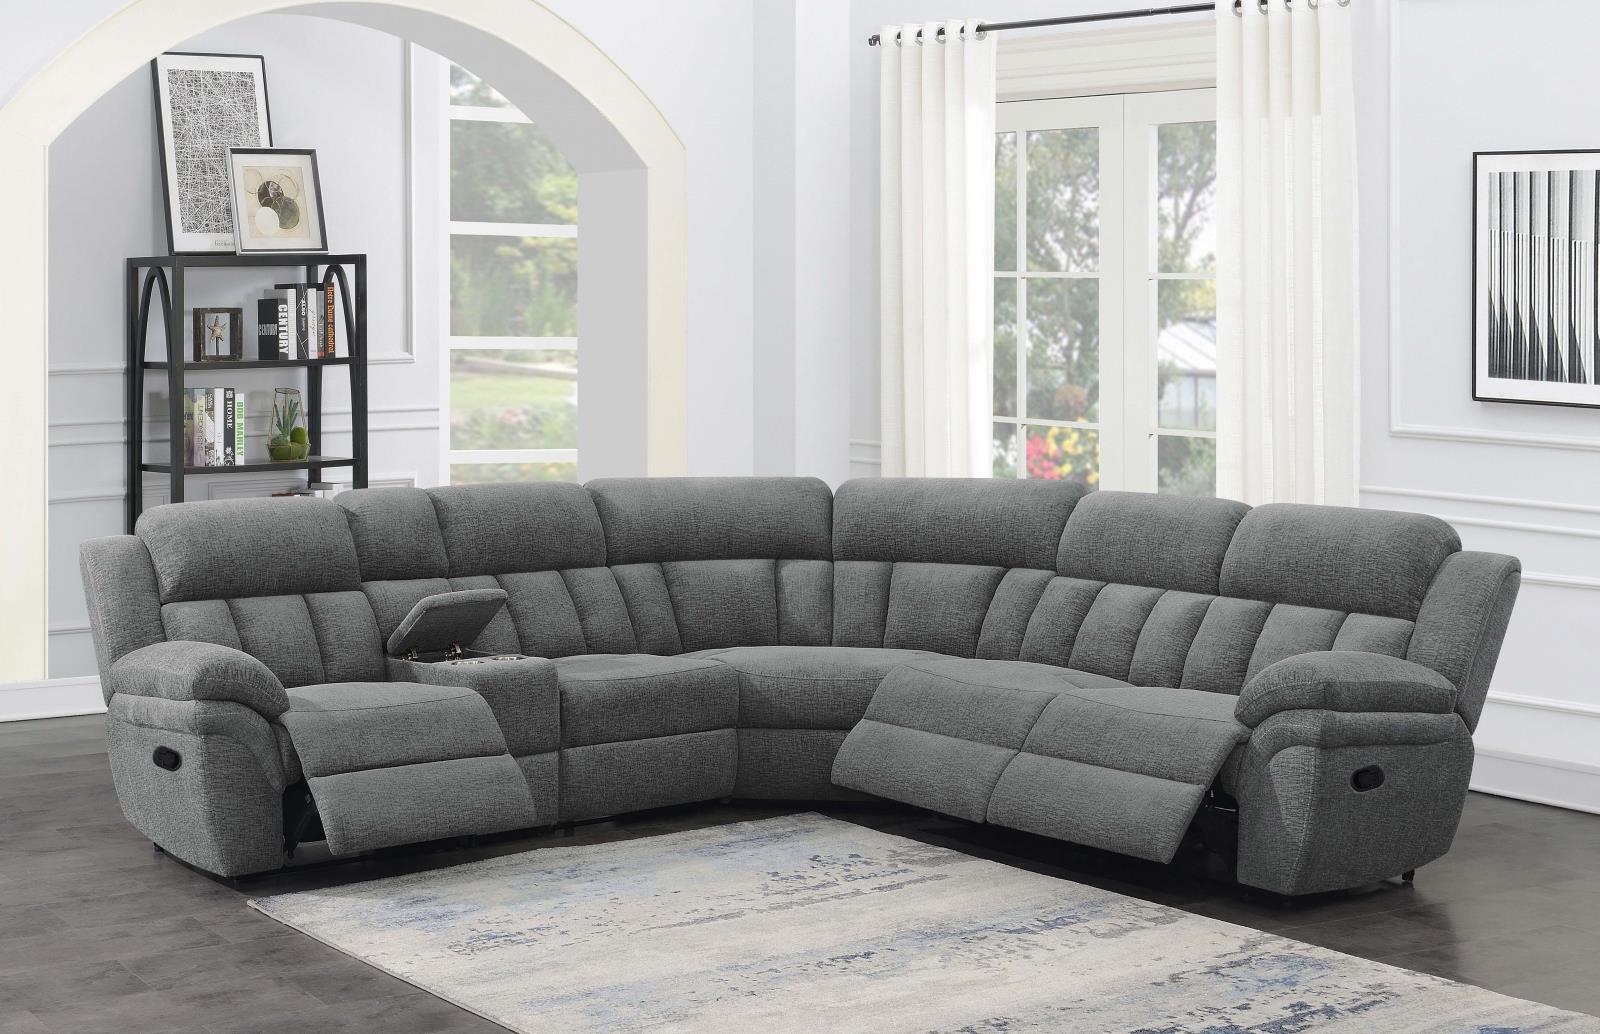 Bahrain 6-piece Upholstered Motion Sectional Charcoal - Half Price Furniture